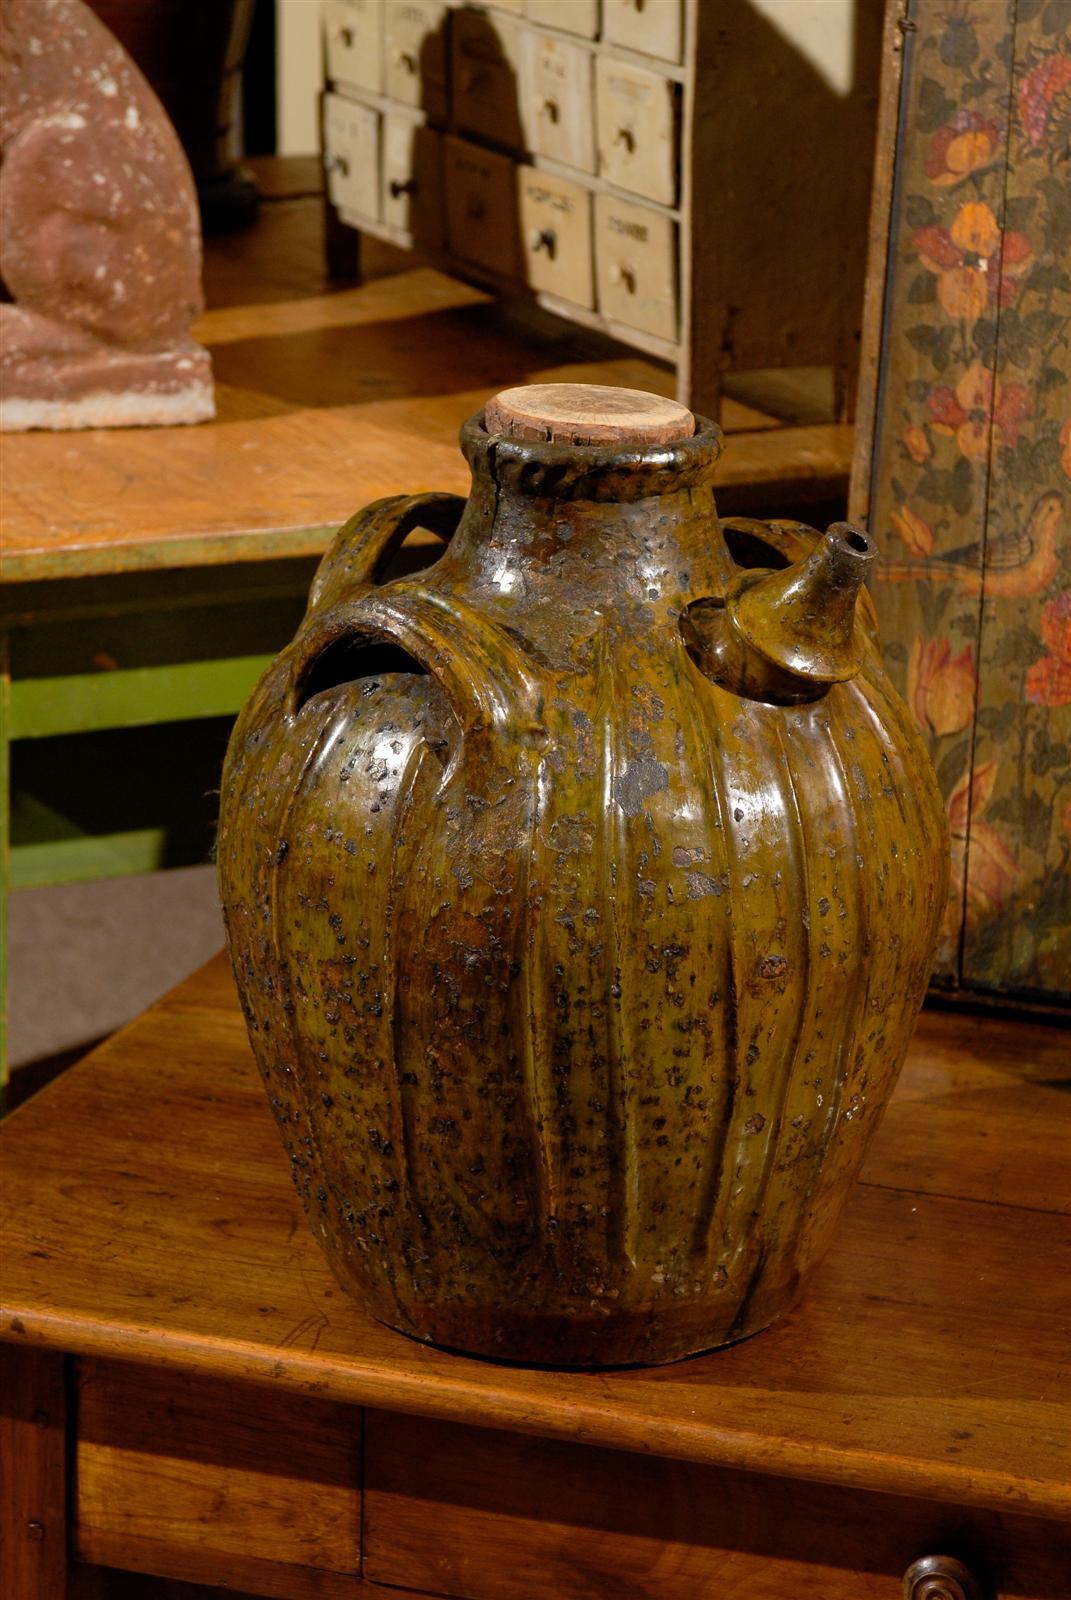 19th Century Terracotta Oil Pot from France, Circa 1860
The colors on these wonderful old oil pots are always beautiful earth tone shades with hints of green.  This one comes from Auvergne, a rural, mountainous region in central France. The very old